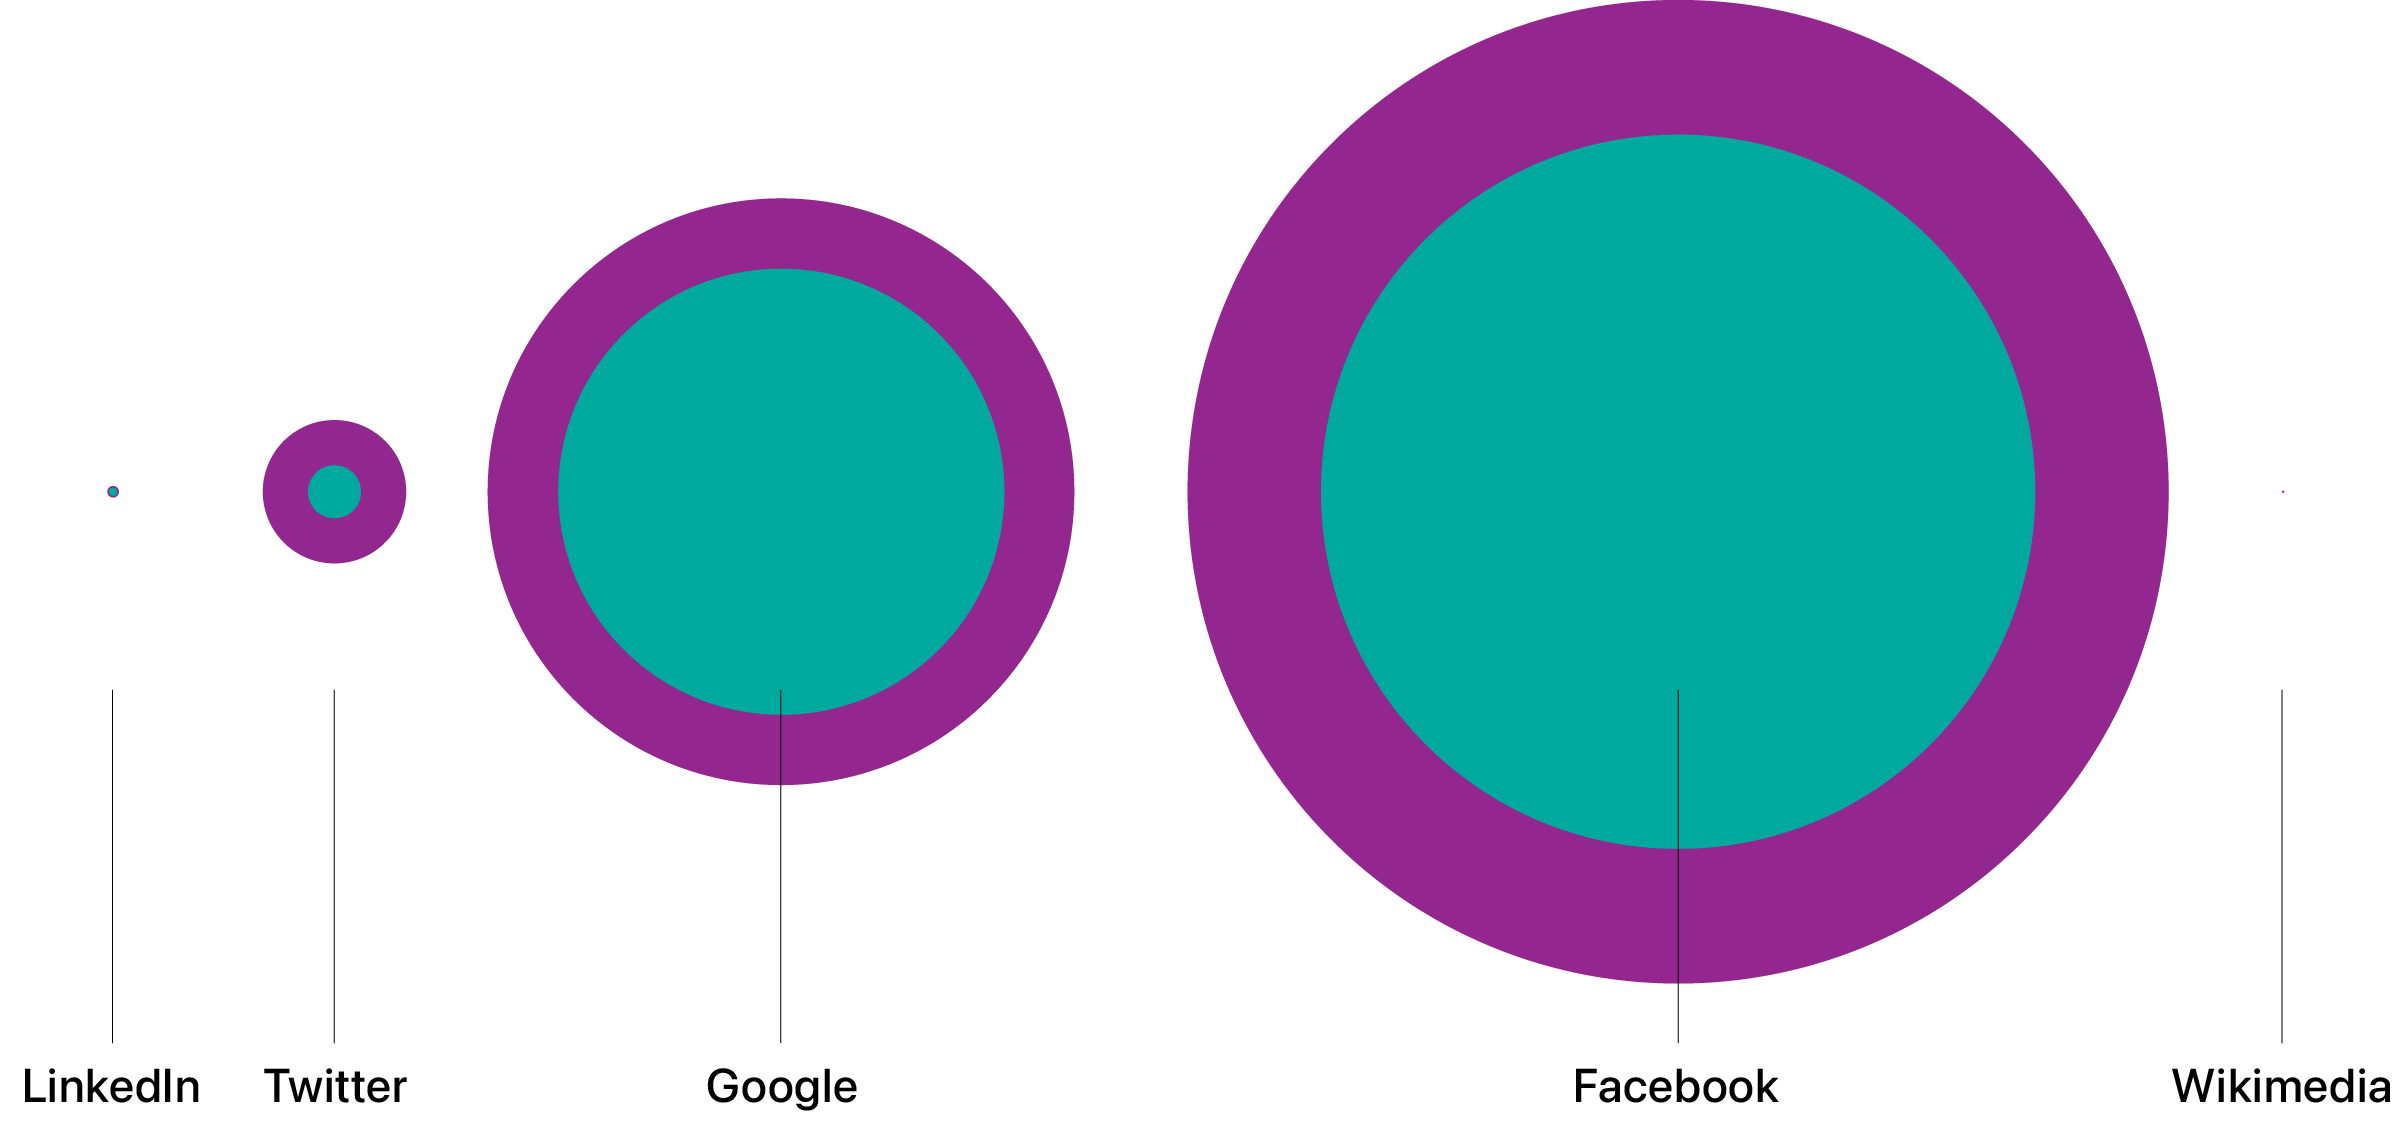 Information graphic showing comparison of user information requests Wikimedia granted compared to other companies